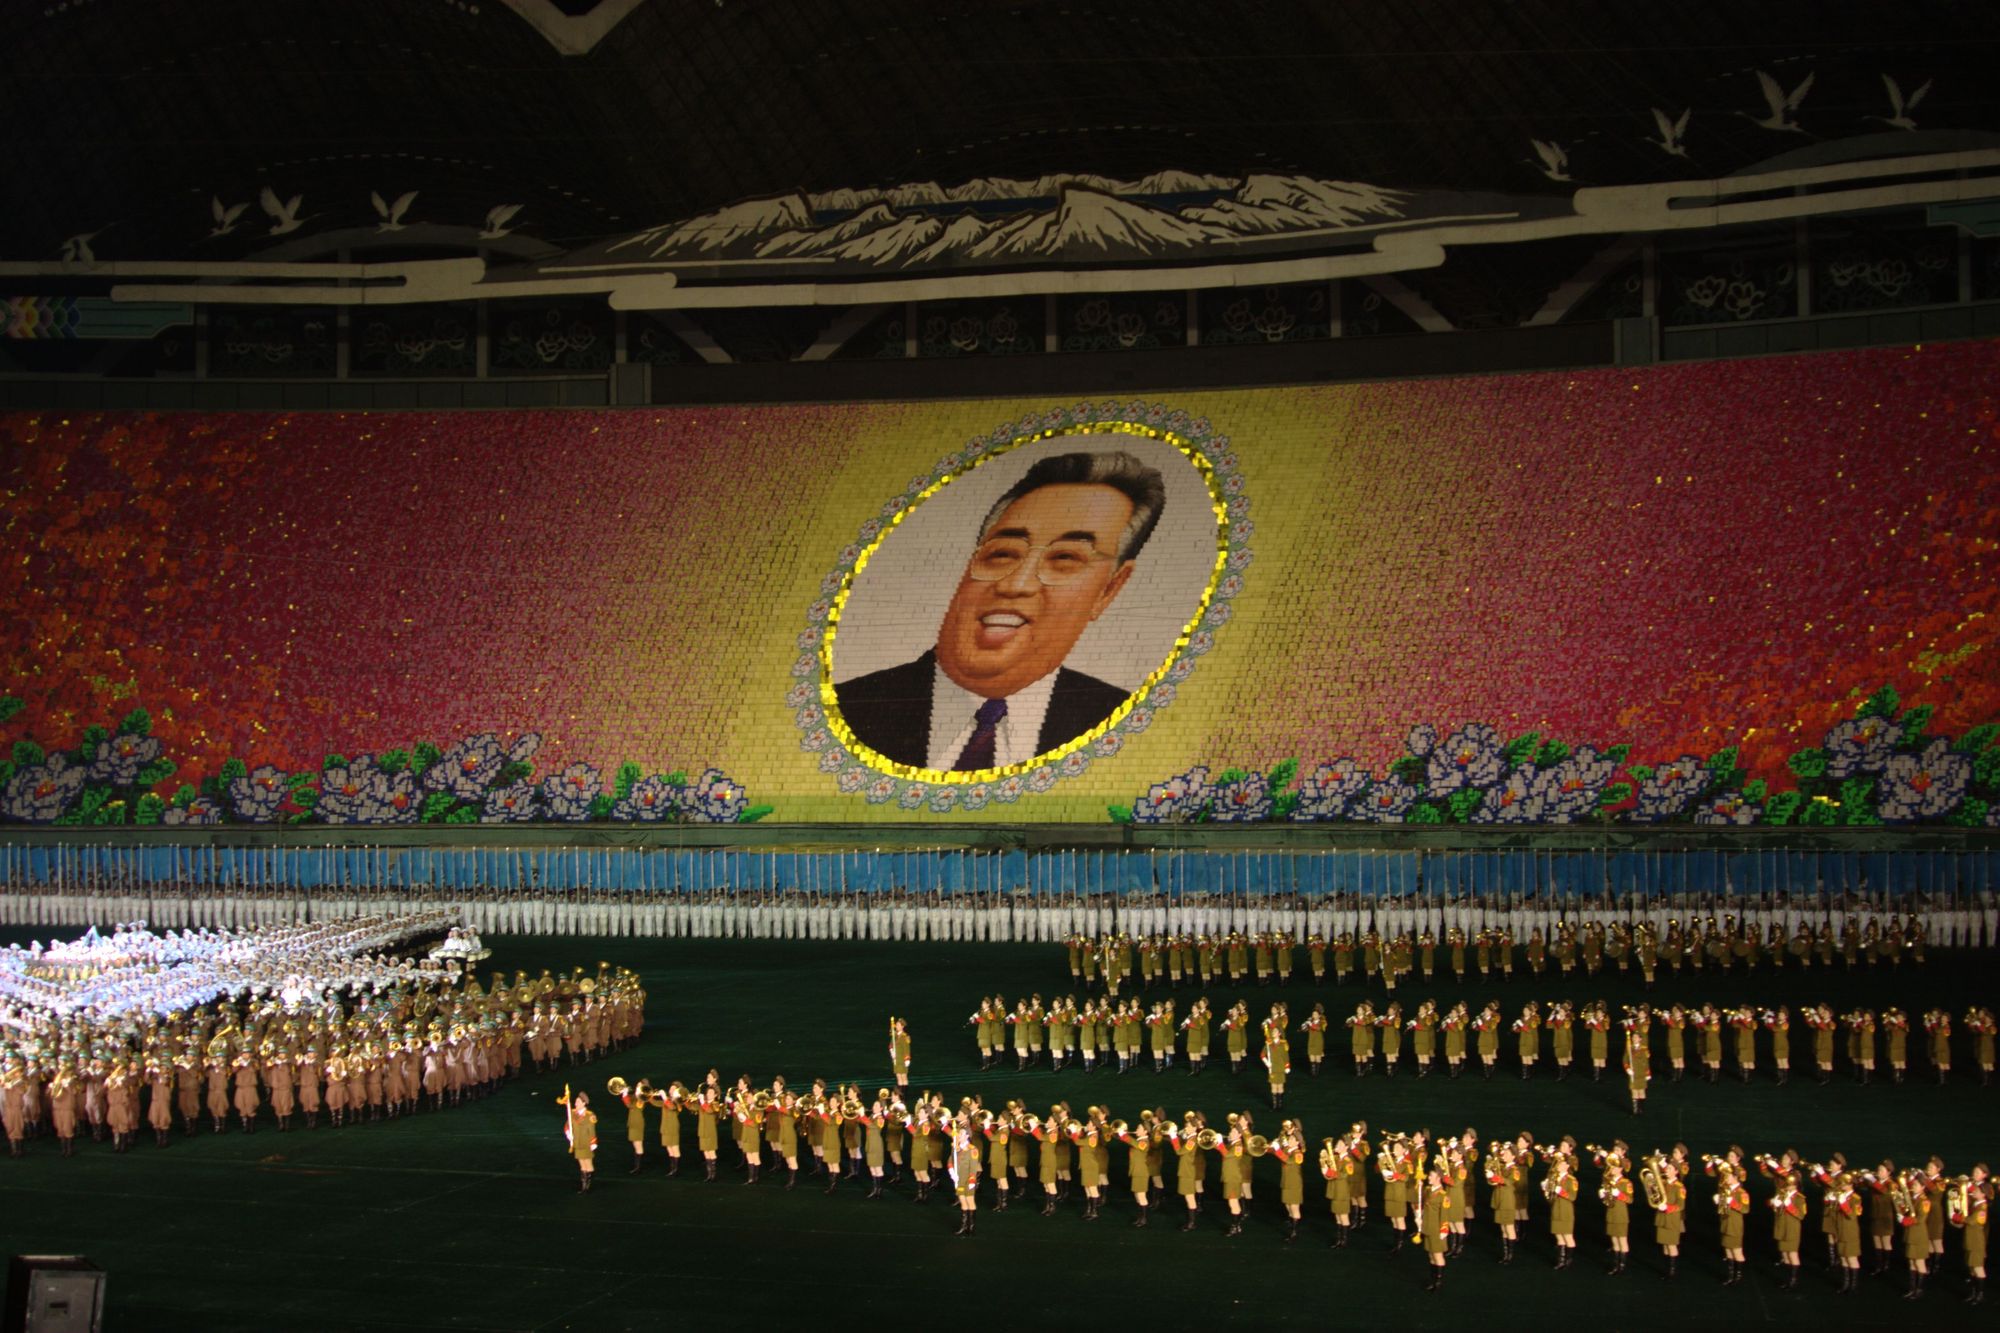 The portrait of Kim Il Sung at a mass game in North Korea, 2007. Photo: Wikimedia Commons